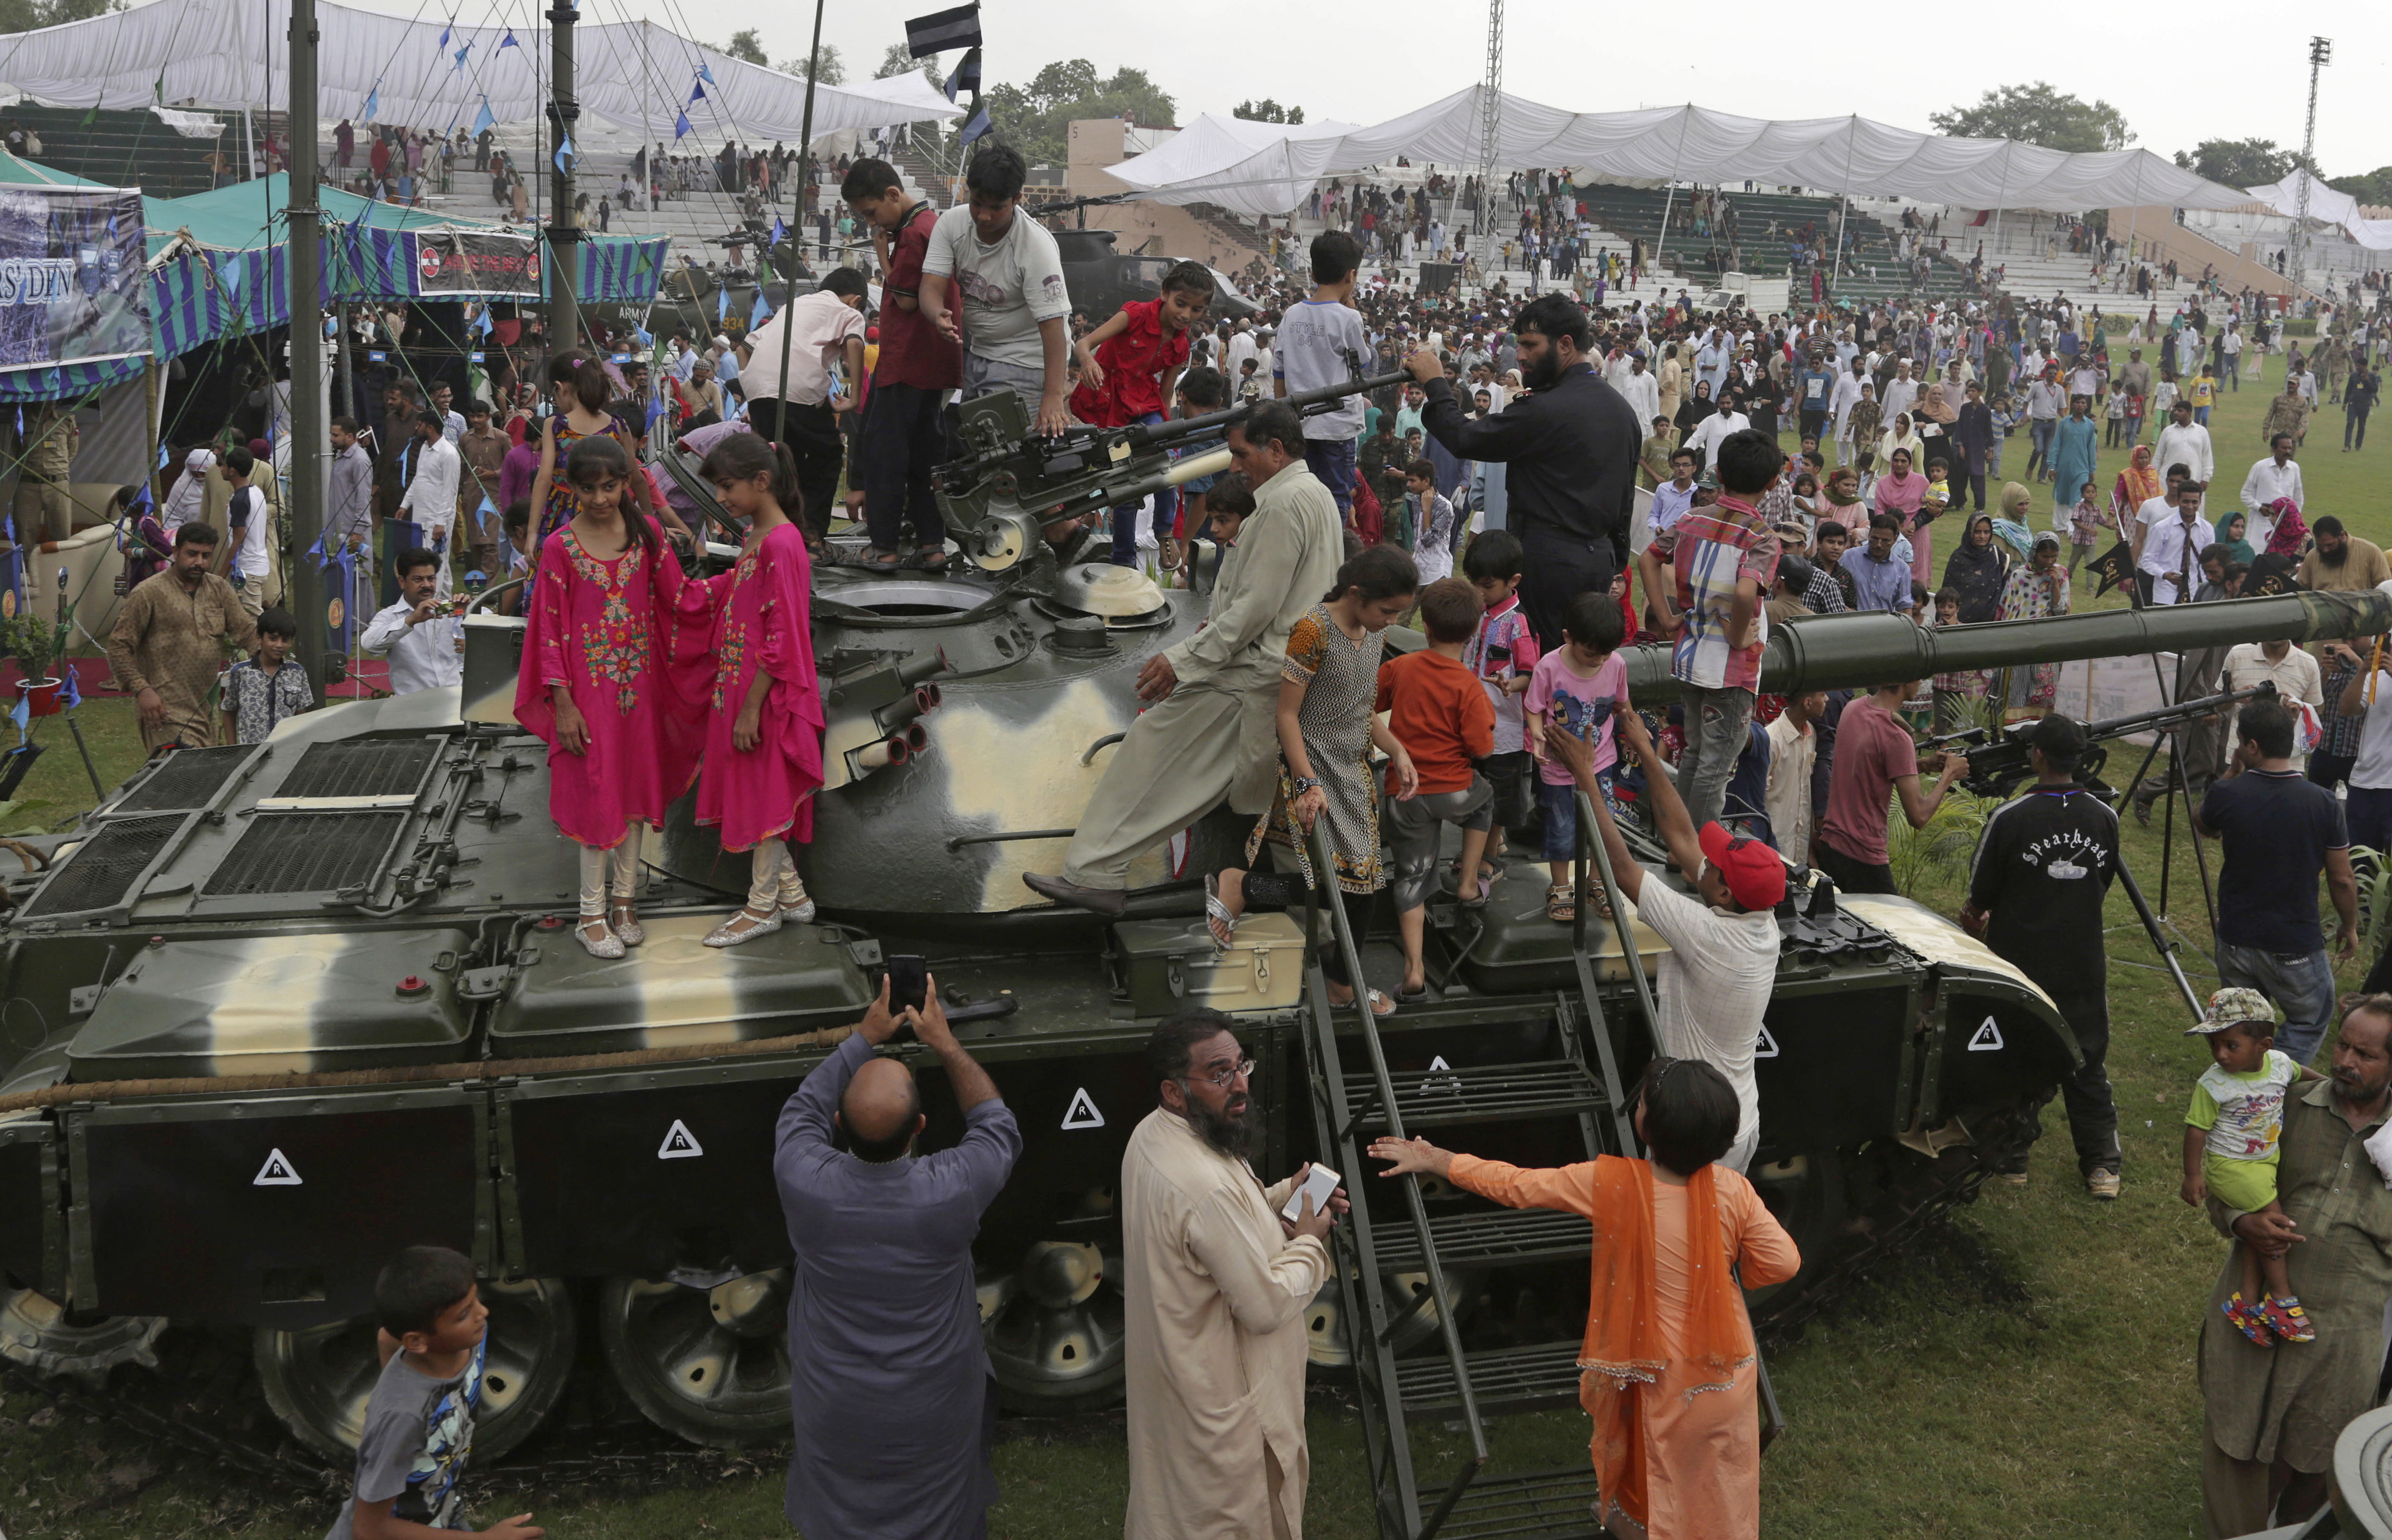 People climb on a tank at a military show to celebrate Pakistan Defense Day, marking the 1965 war with India over the disputed Kashmir region, in Lahore, Pakistan, Wednesday, Sept. 6, 2017. (AP Photo/K.M. Chaudary)